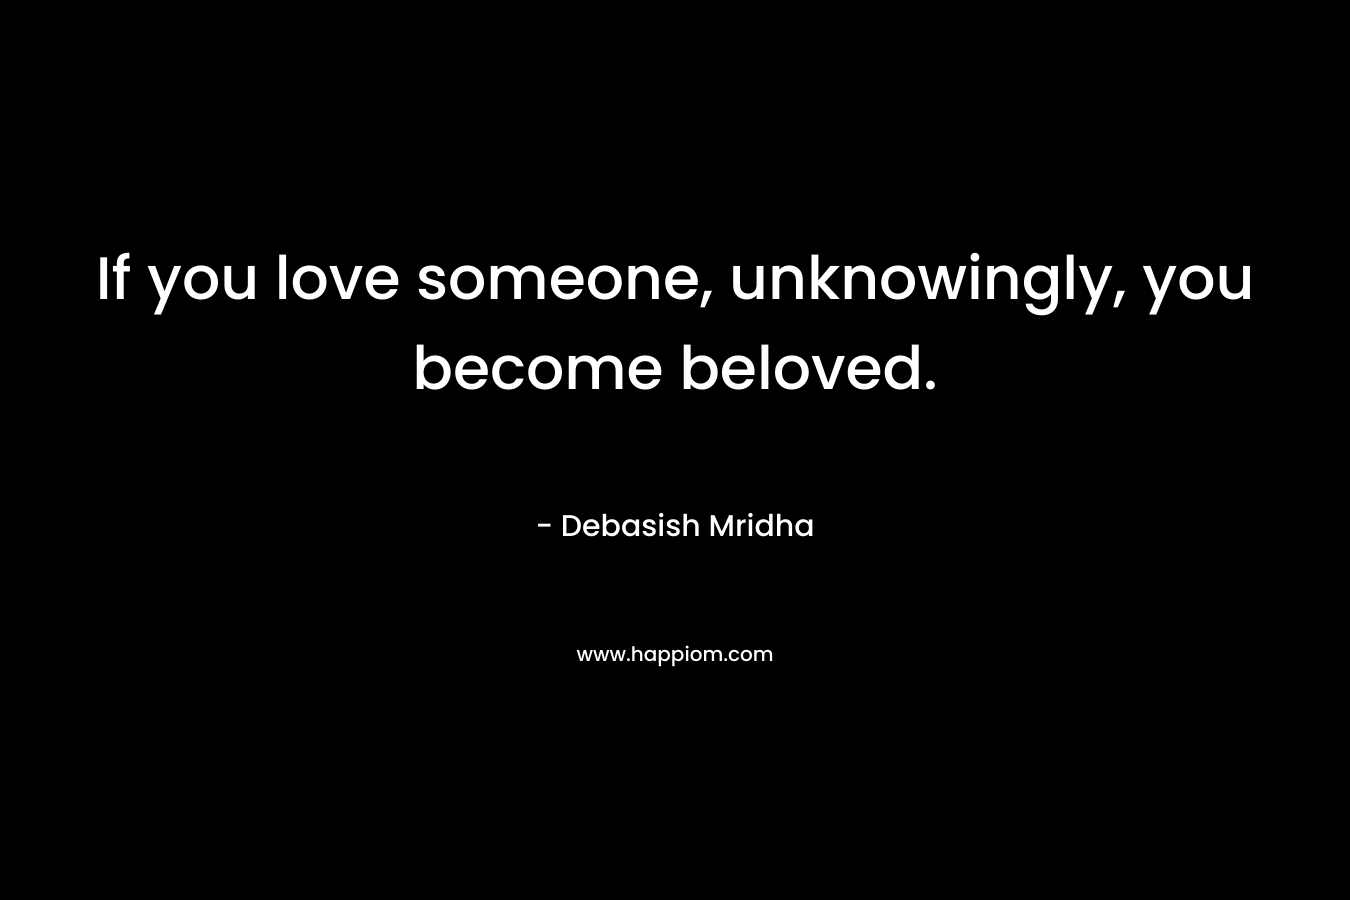 If you love someone, unknowingly, you become beloved.